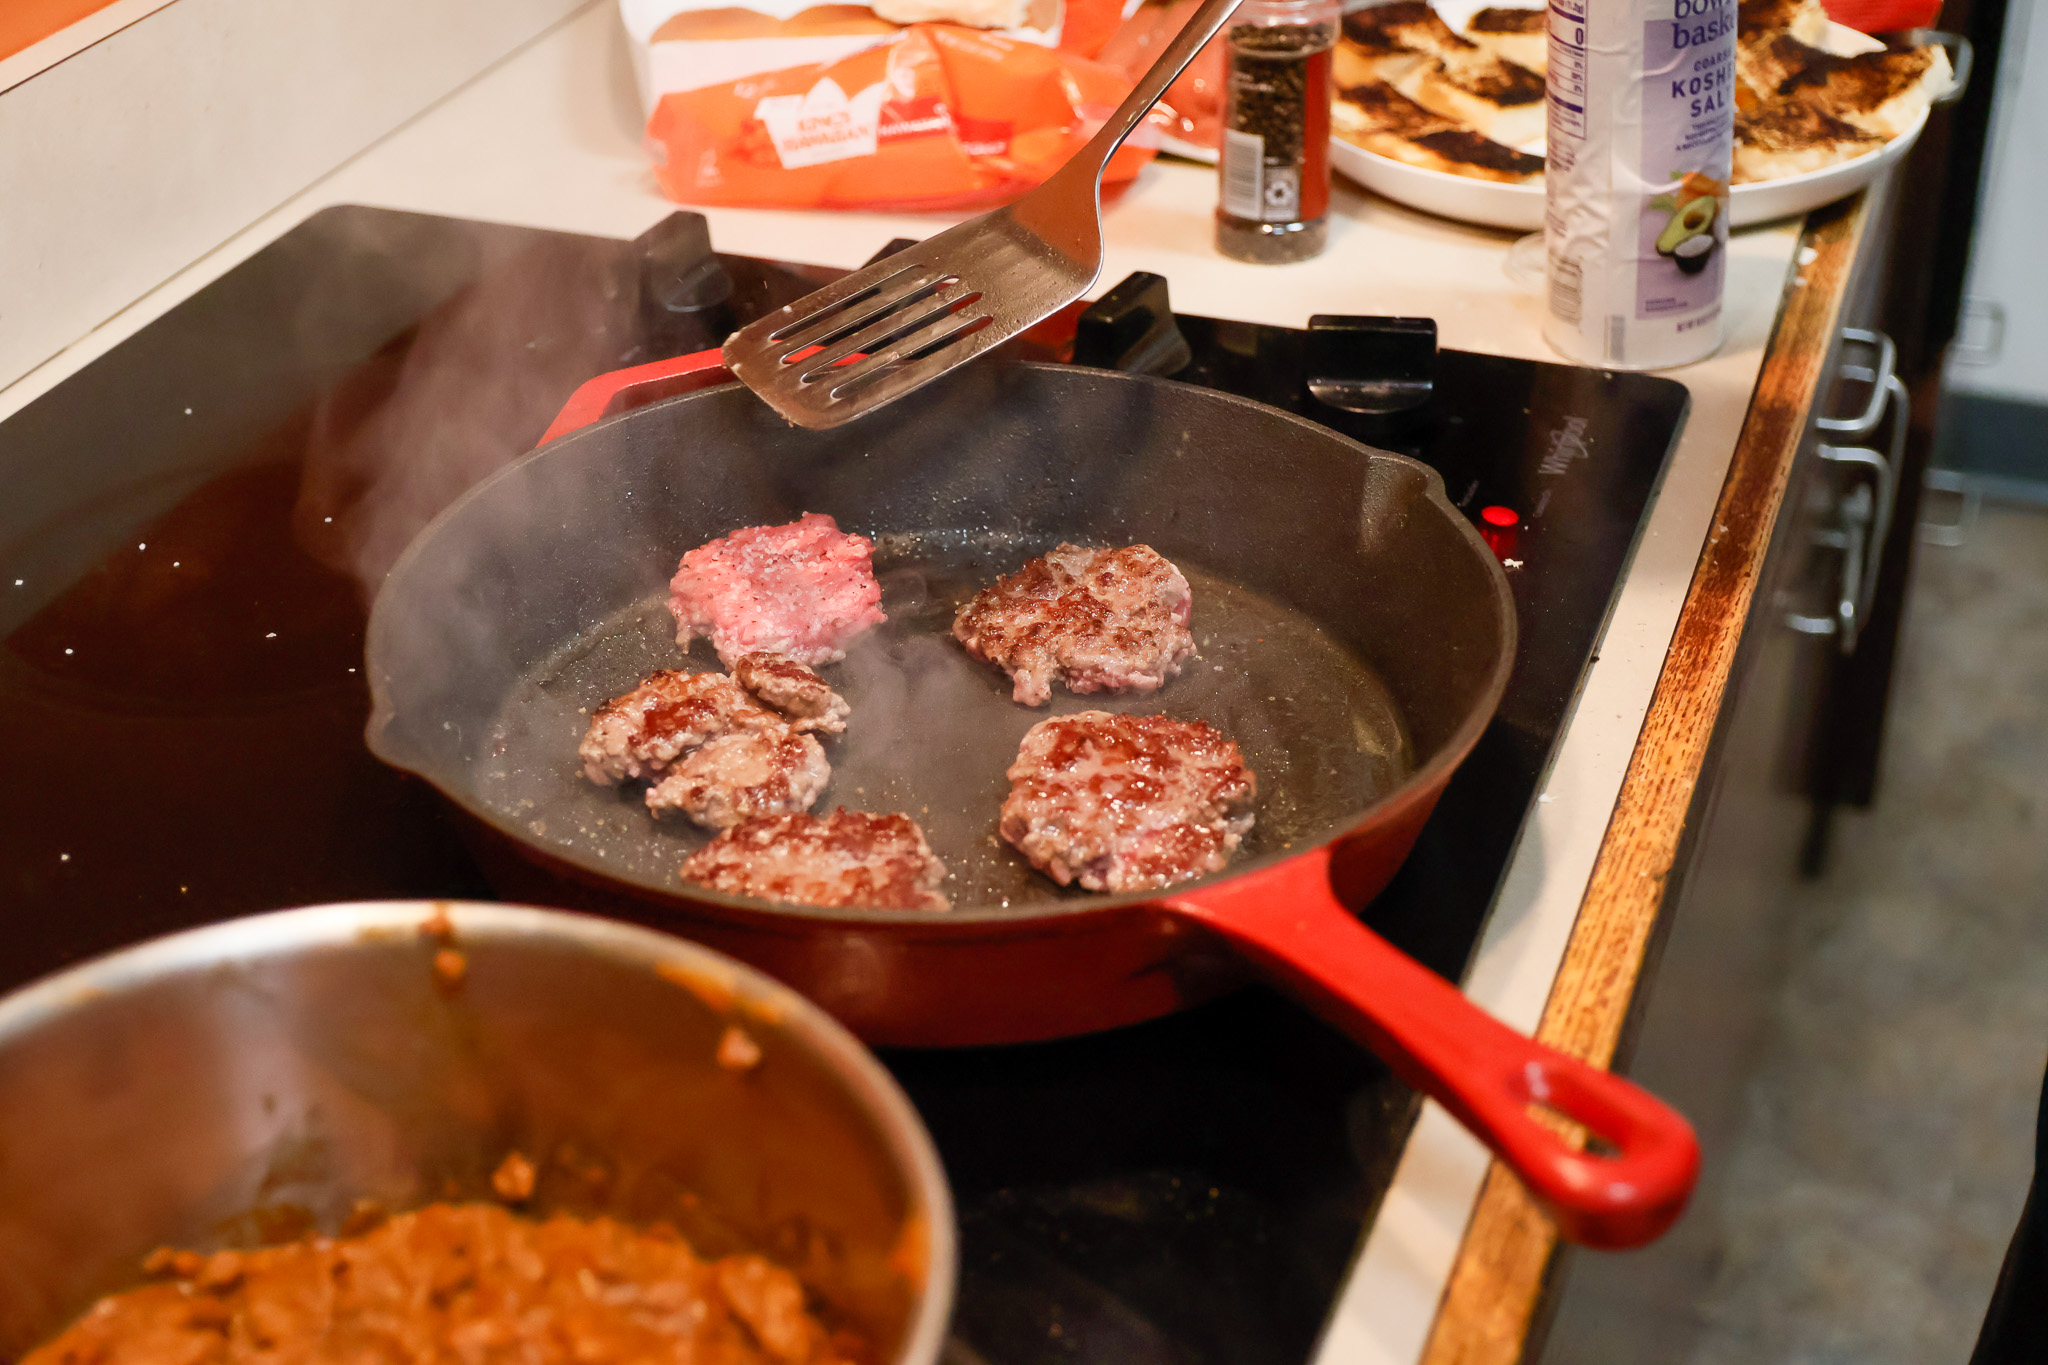 Once you have as many meat balls as you can fit on your skillet, start squishing them down into proper patties.
Sal DiMaggio | The Montclarion